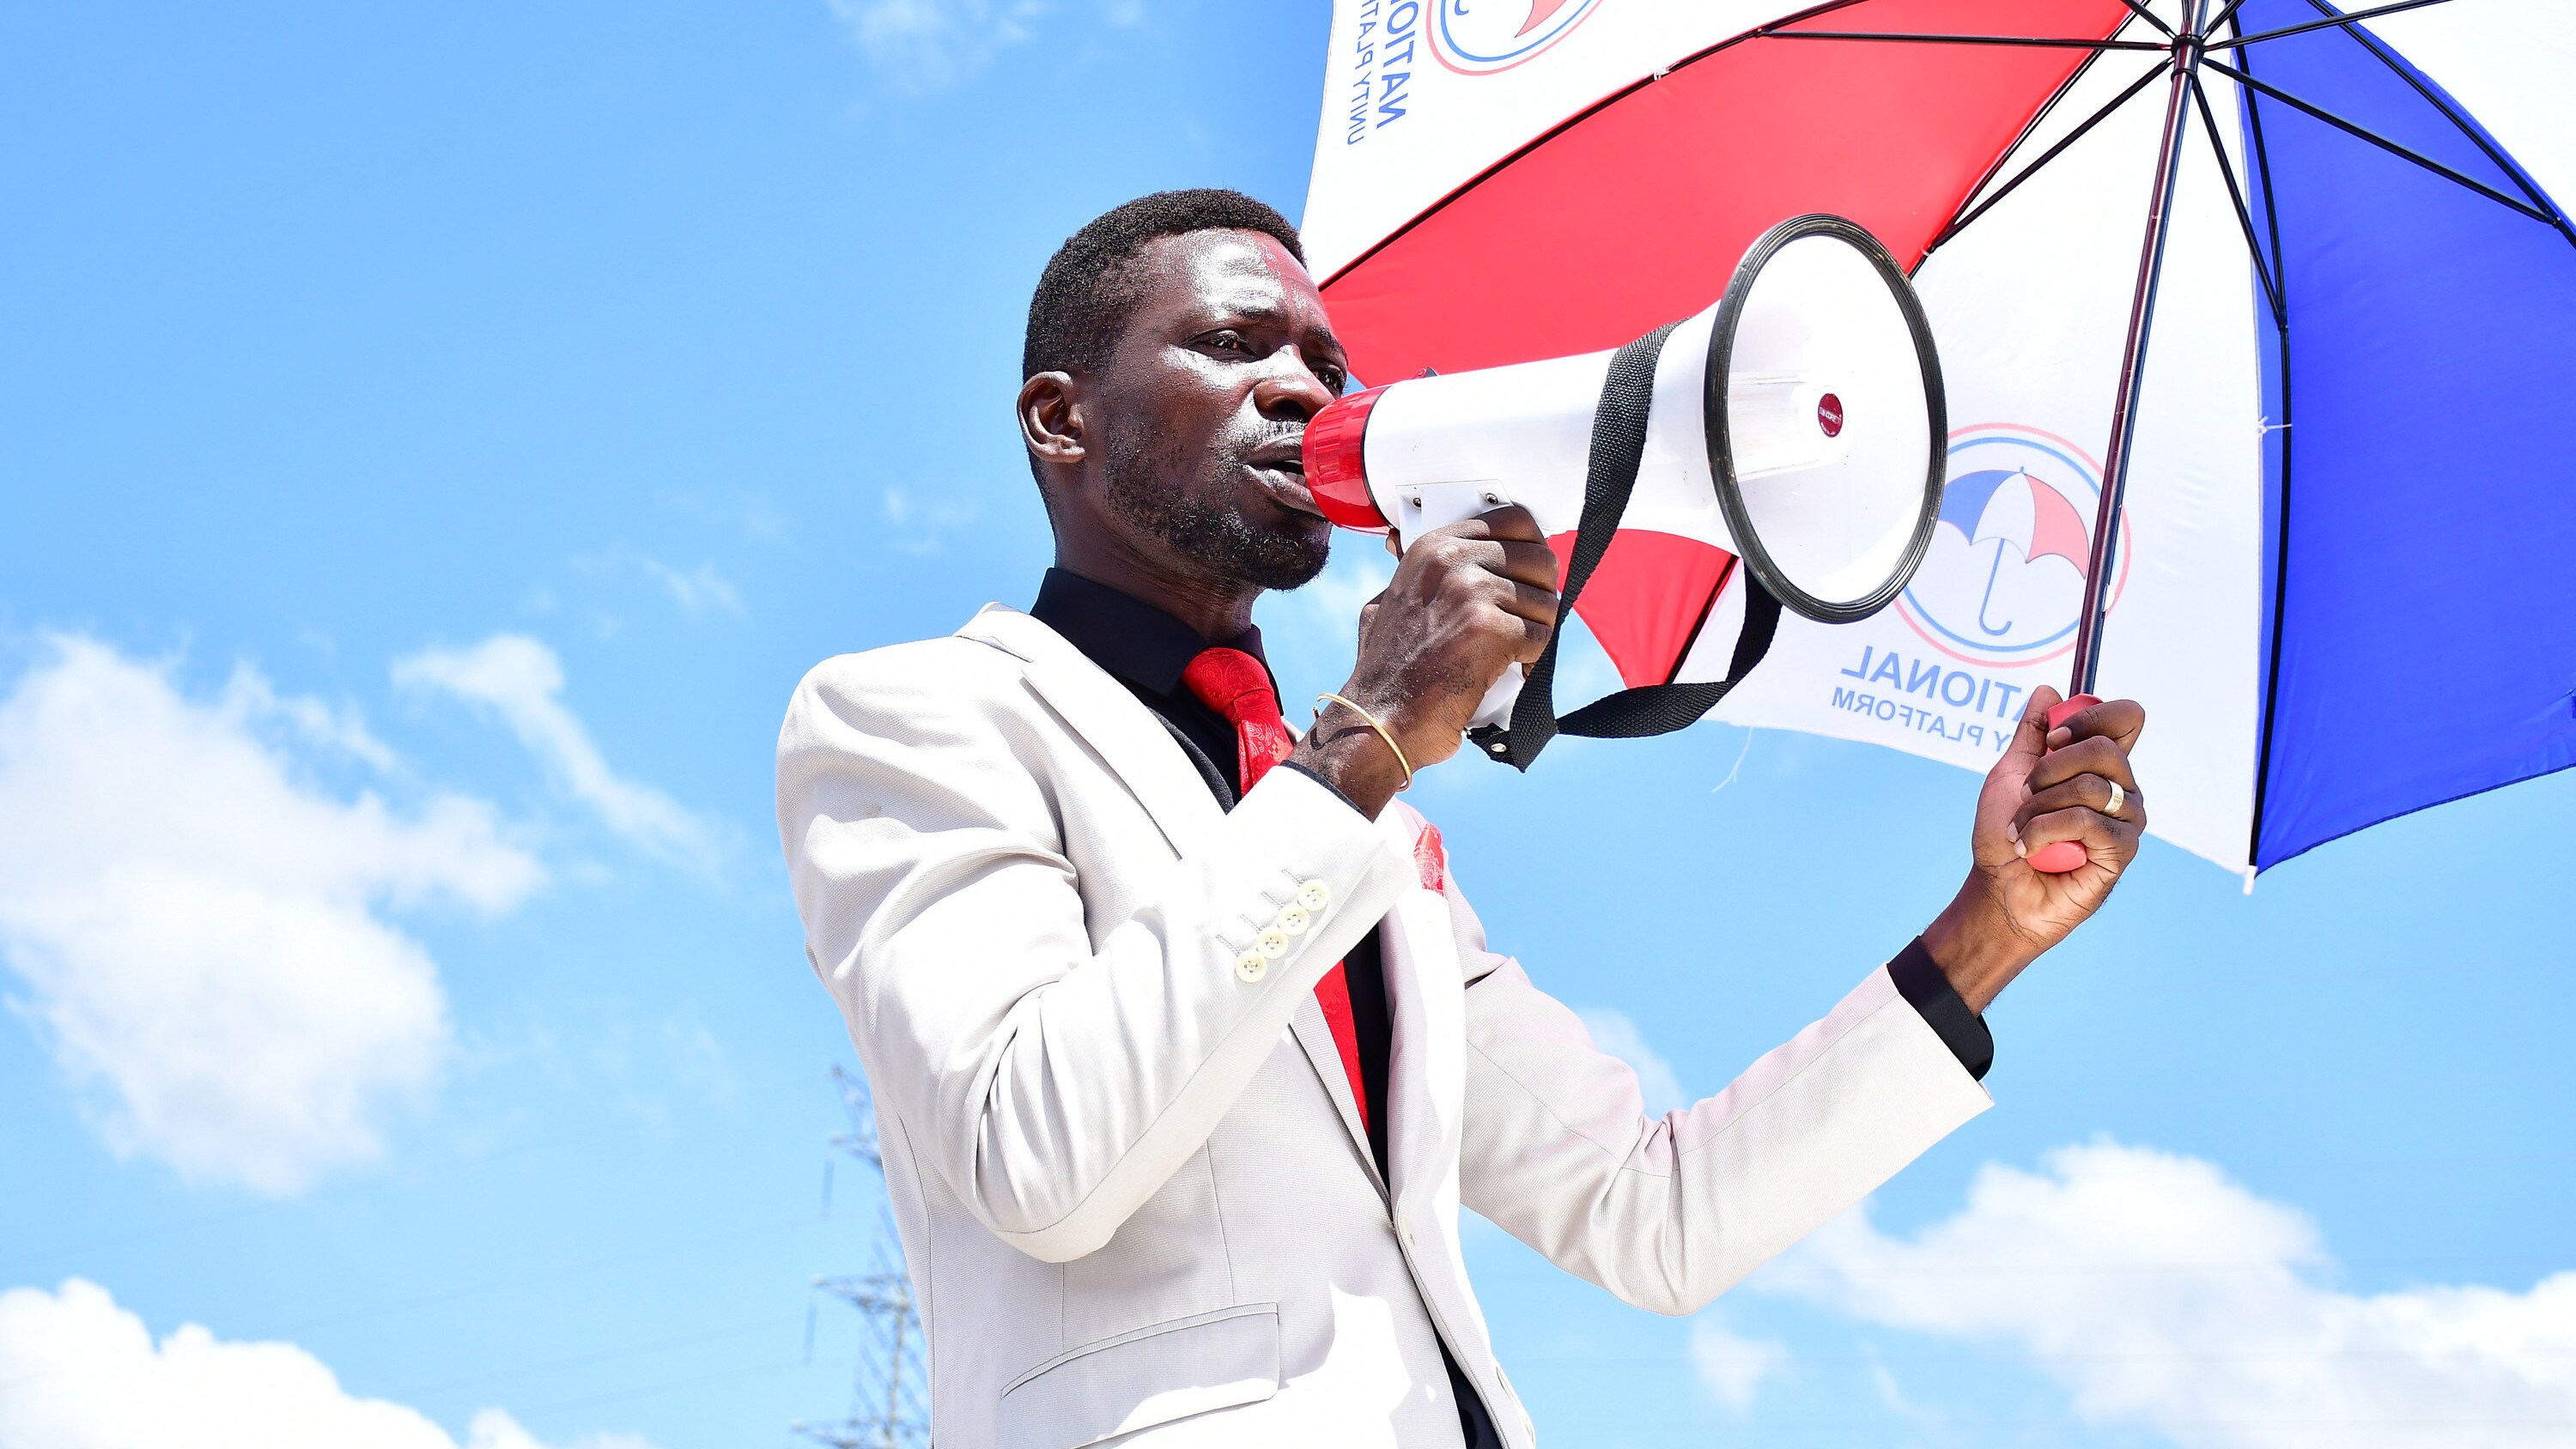 Ugandan politician Robert Kyagulanyi Ssentamu, also known as Bobi Wine, campaigns with a megaphone. Before they could re ach the campaign venue in Kumi District, he and his campaign team were tear gassed and subjected to numerous obstacles by Ugandan security forces on November 15, 2020. (photo credit: Lookman Kampala)